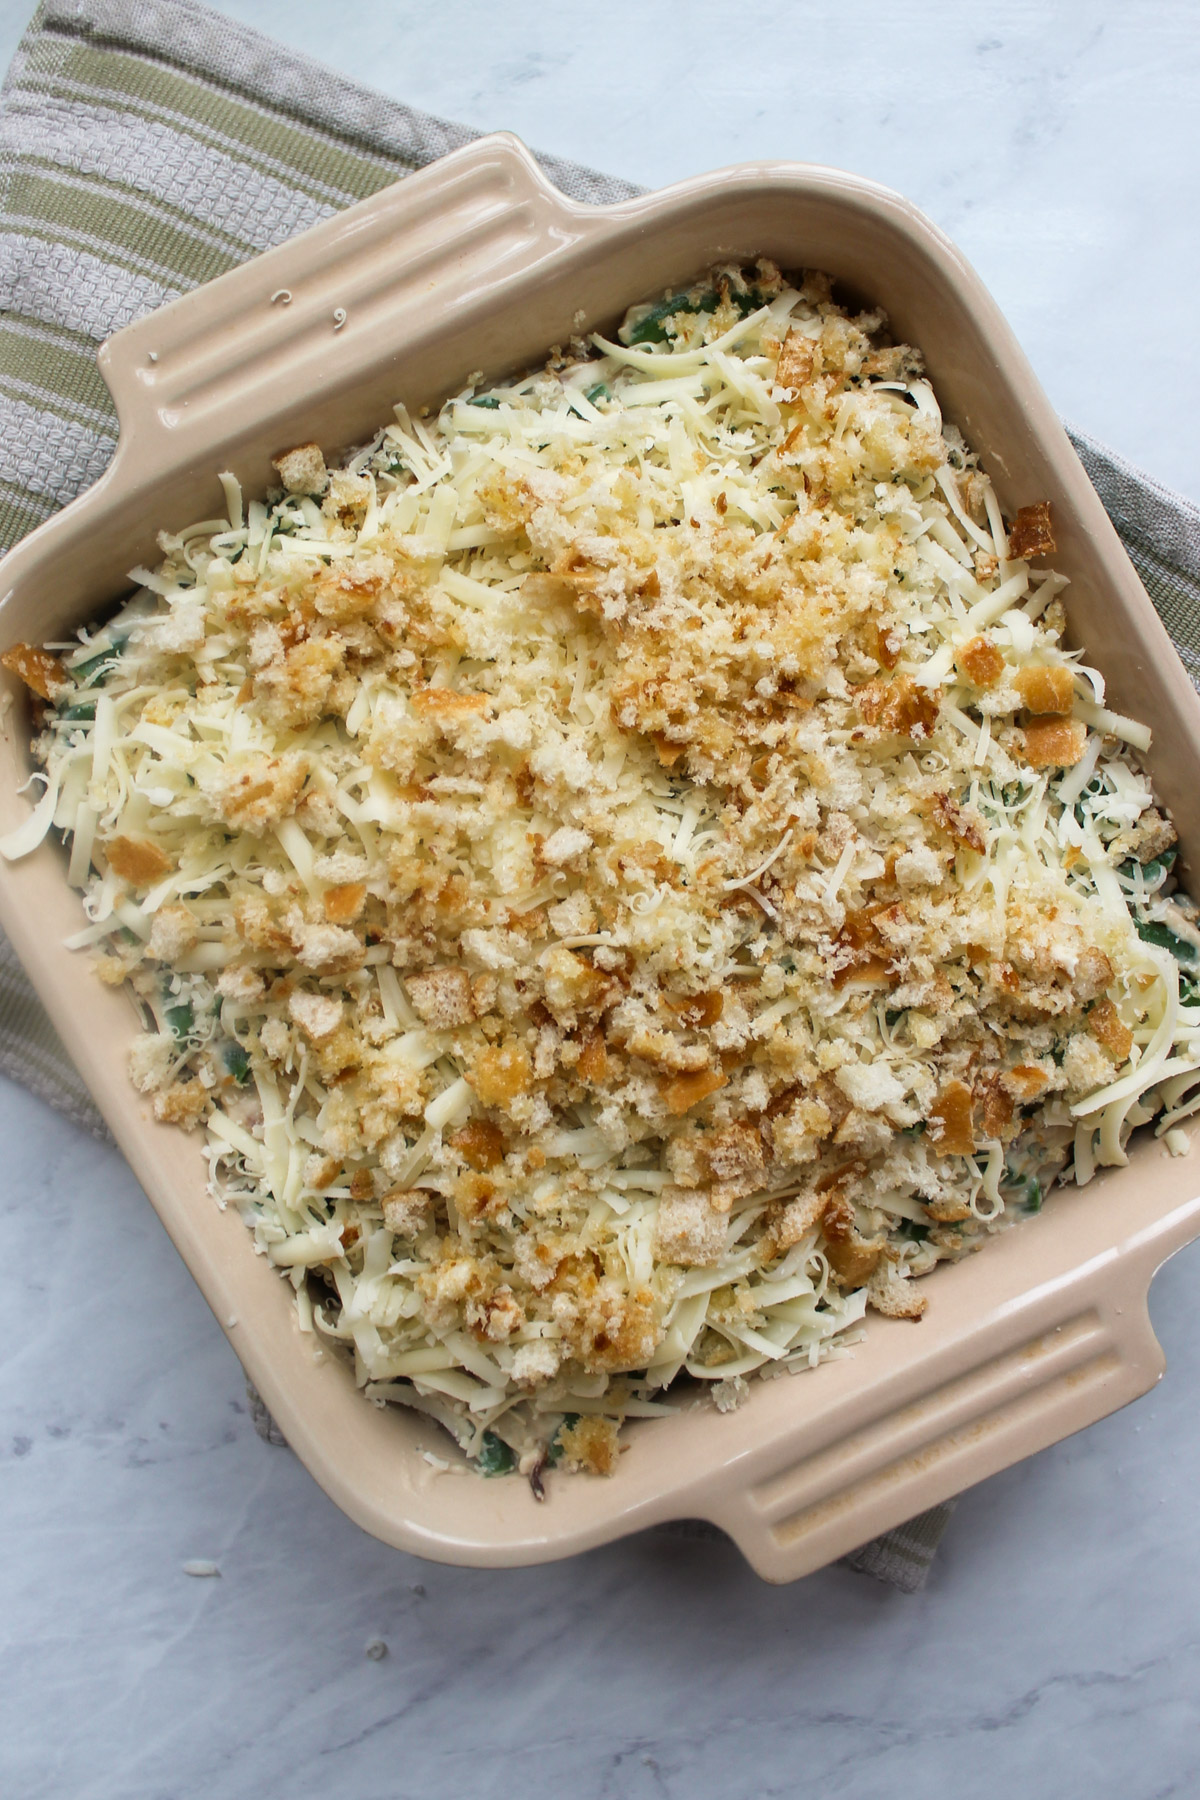 Unbaked green bean au gratin casserole topped with cheese an breadcrumbs.